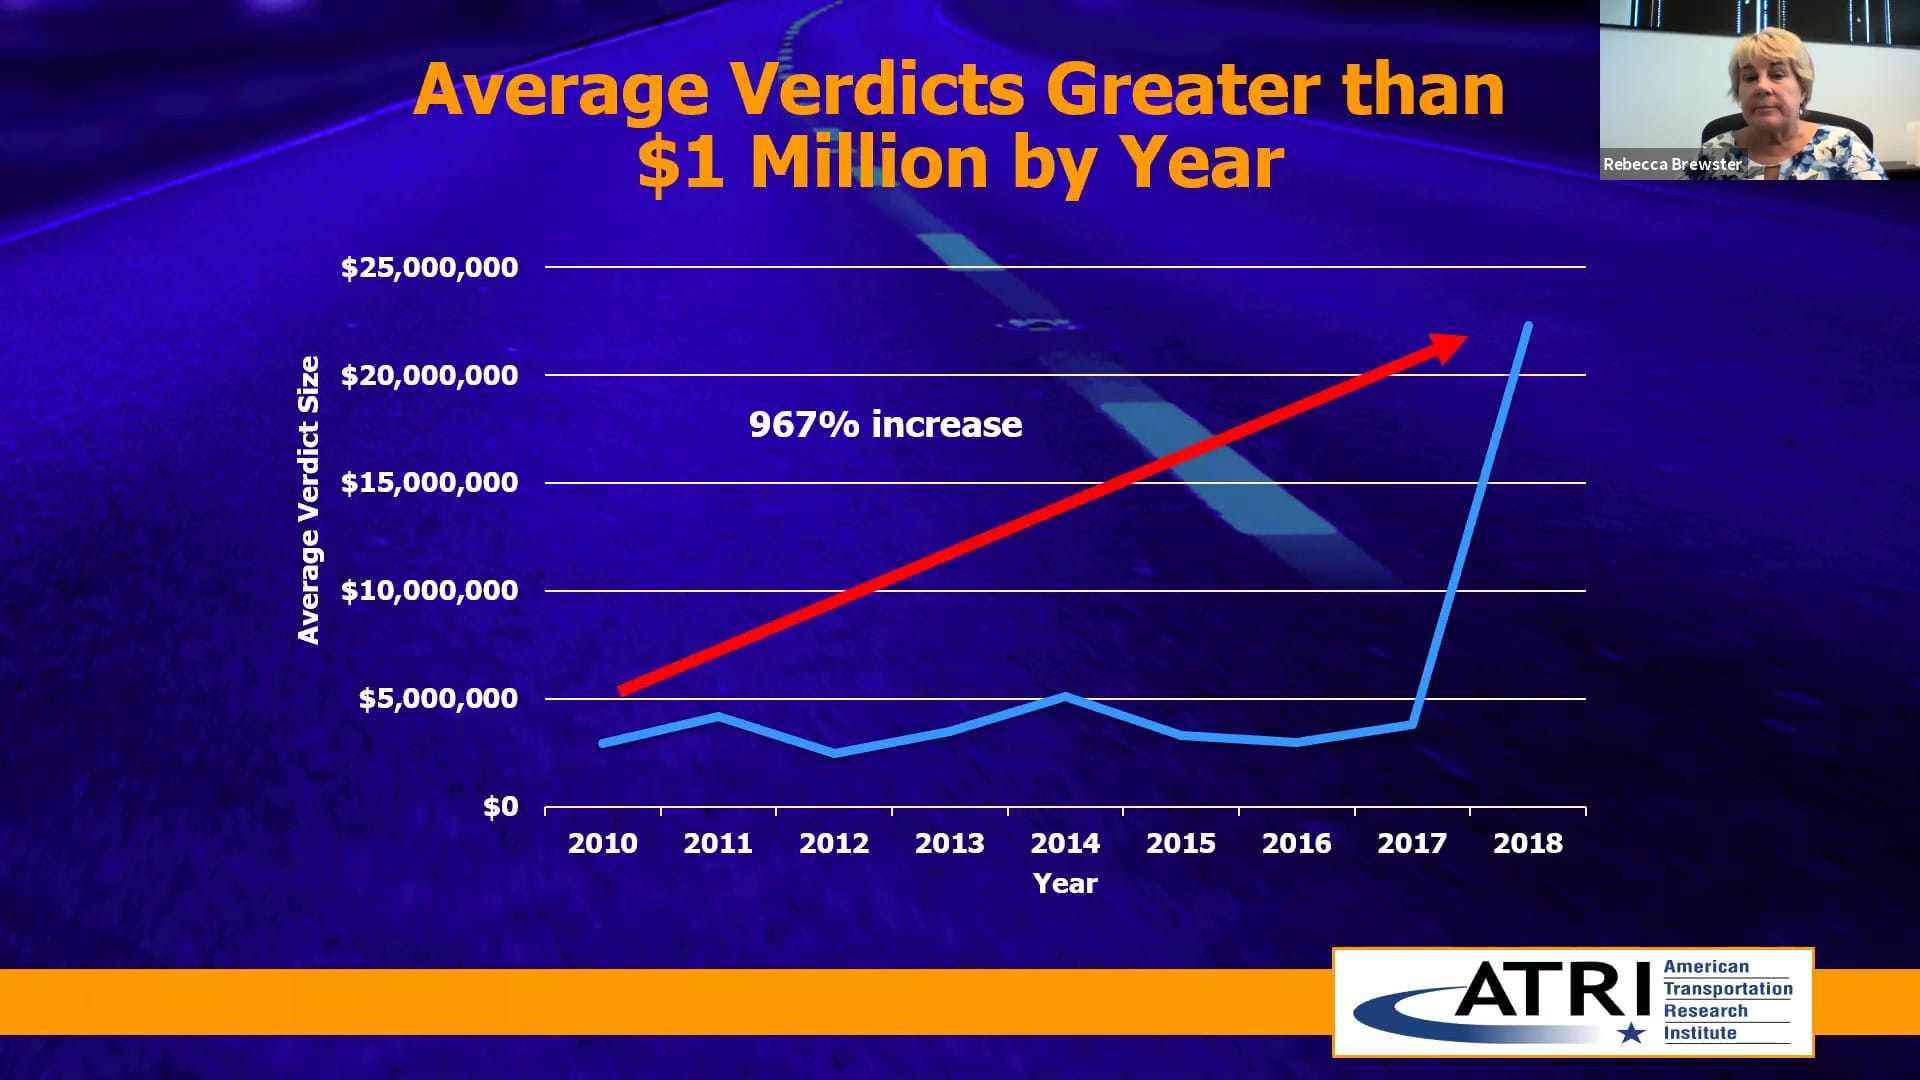 Trucking Industry Concerns 2020 from ATRI Nuclear Verdict Averages Million Plus